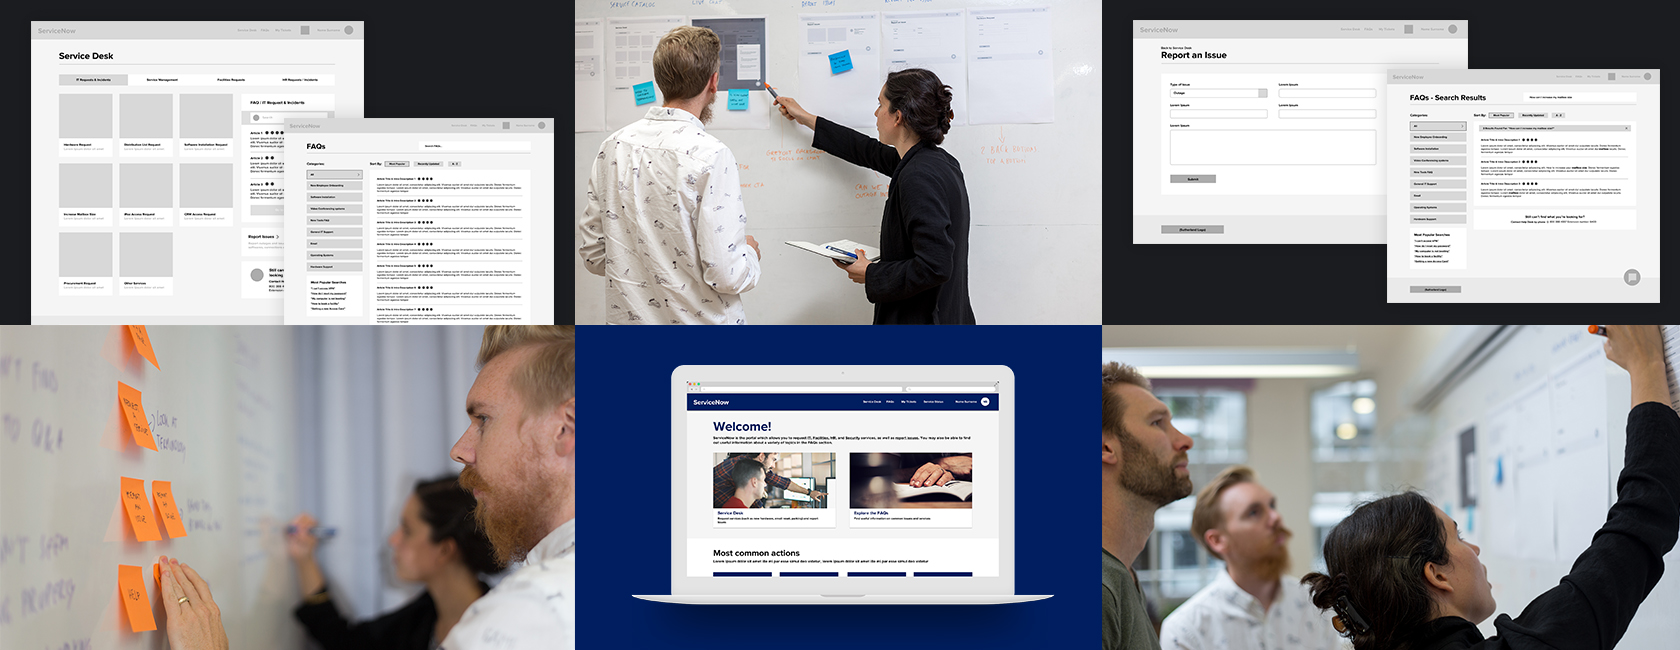 a selection of images showing our wireframes, UI, and photos of the team working on the project.